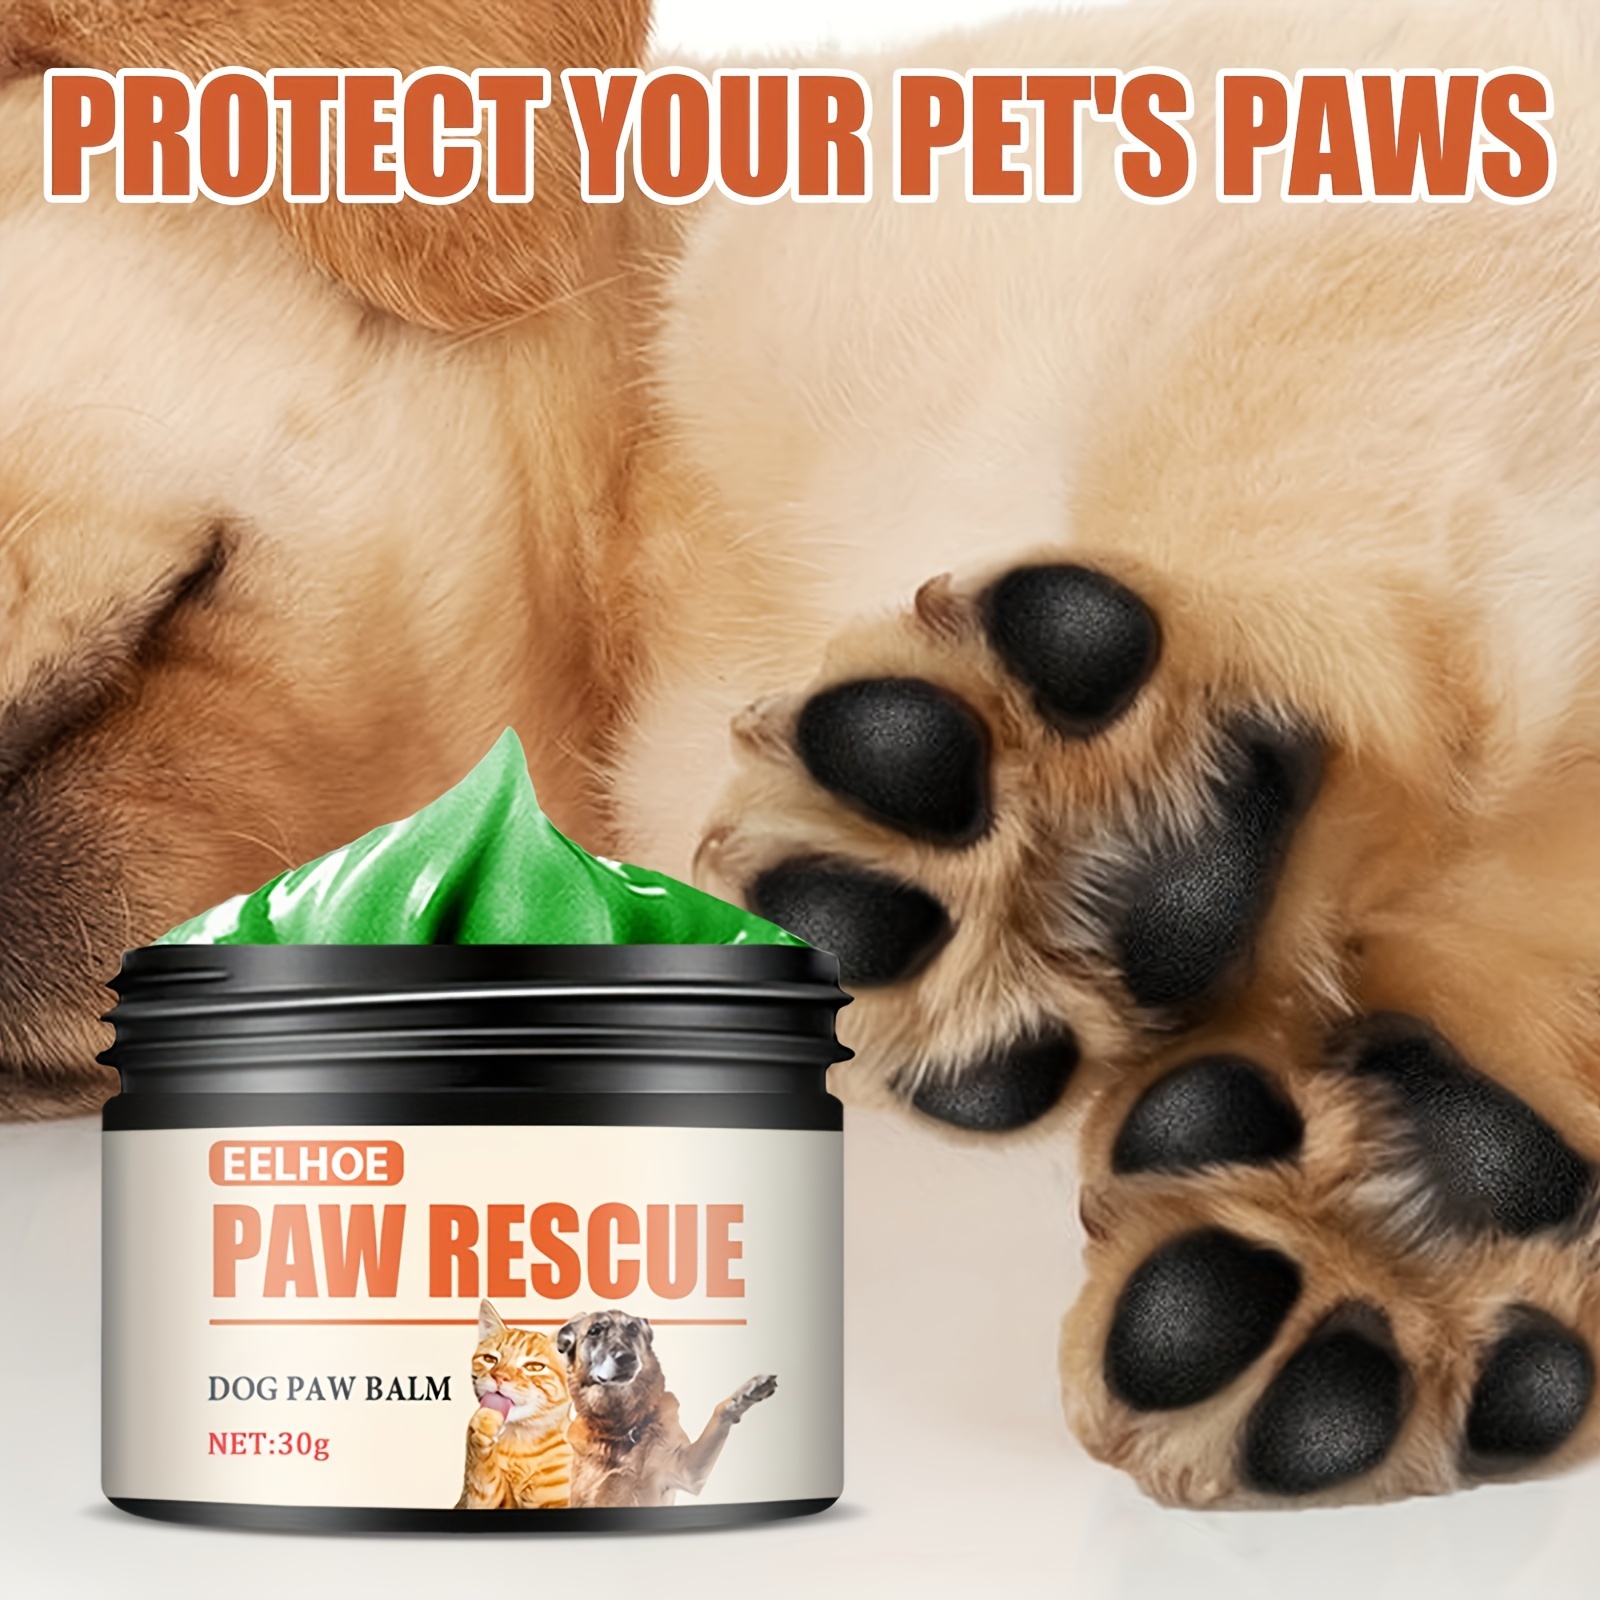 

Pet Paw Balm, Dog Paw Moisturizing Balm, Paw Cream, Pet Paw Protection, Soothes & Repairs Cracked Paws